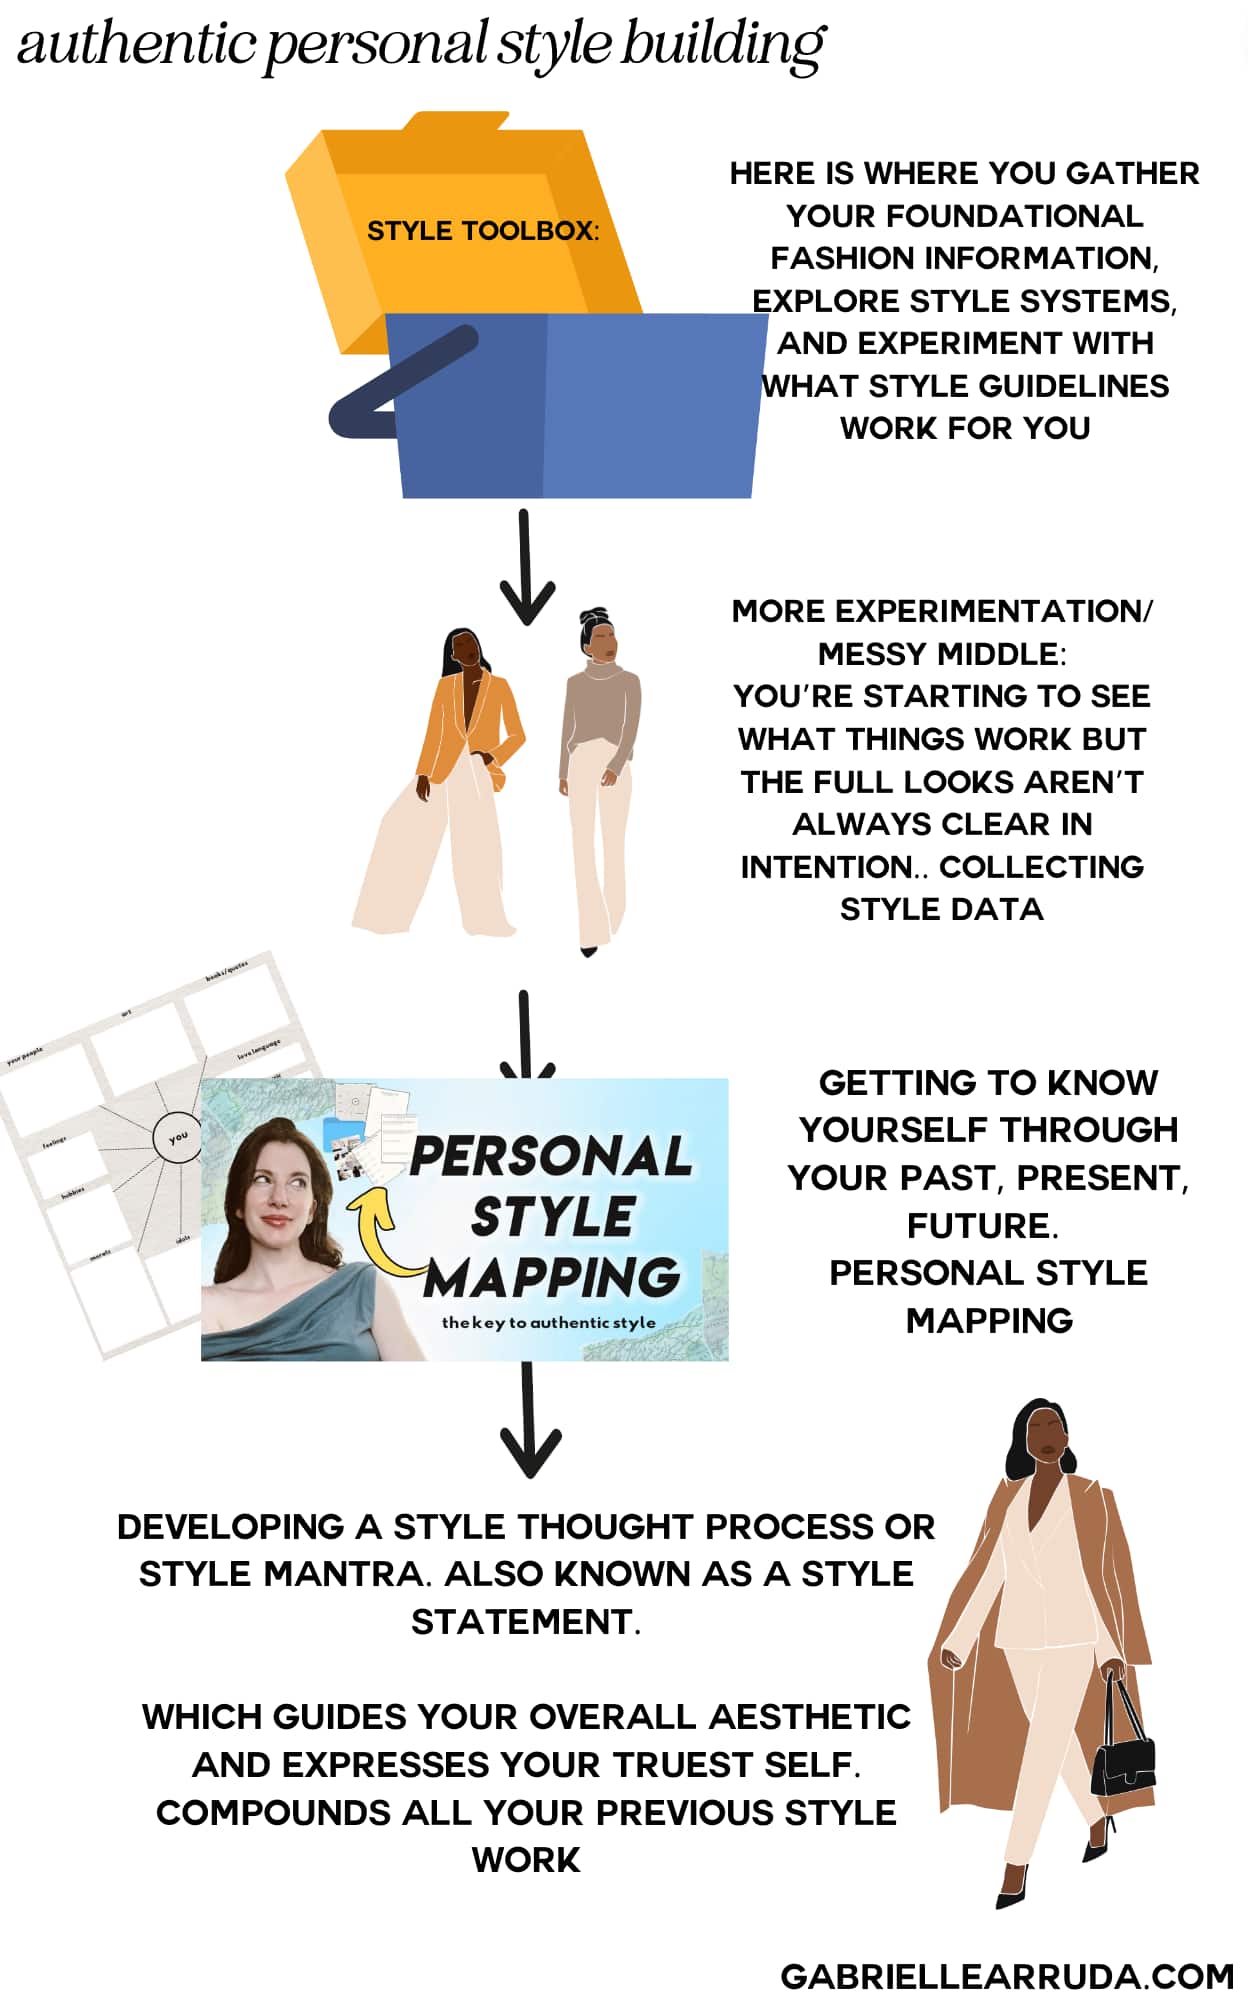 personal style statement building steps toward authentic style